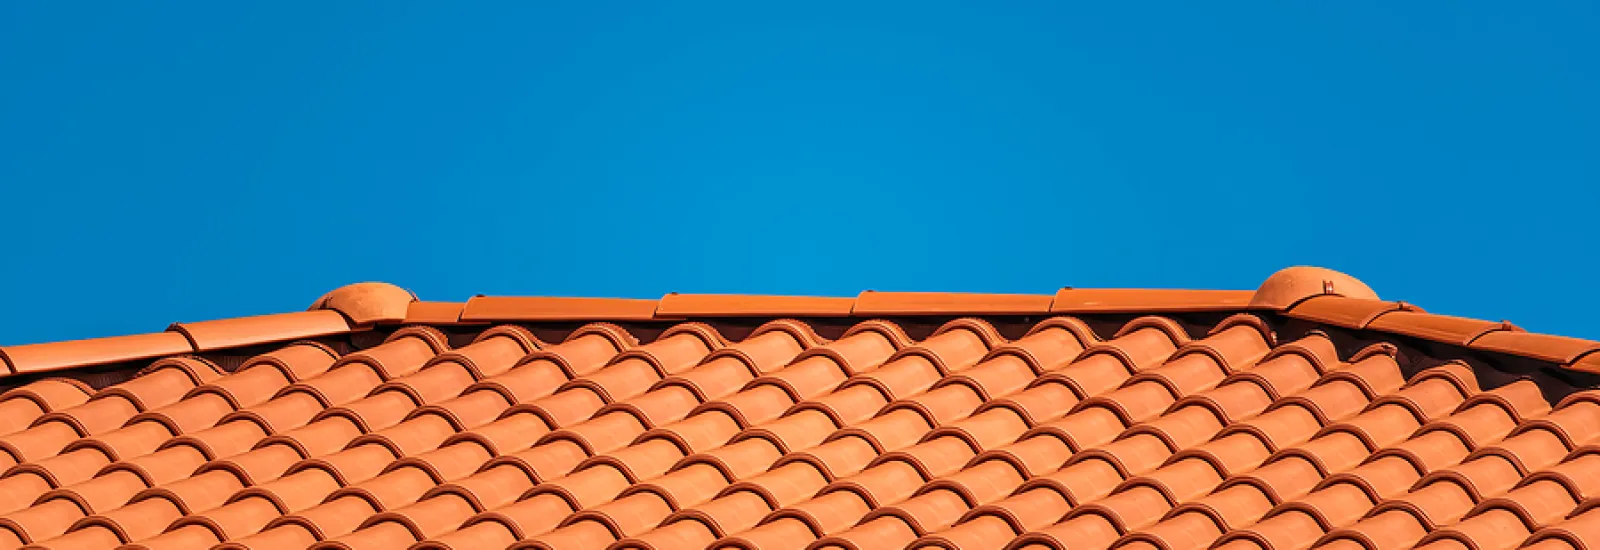 Concrete Roof vs. Clay Roof: Which One Should You Choose?